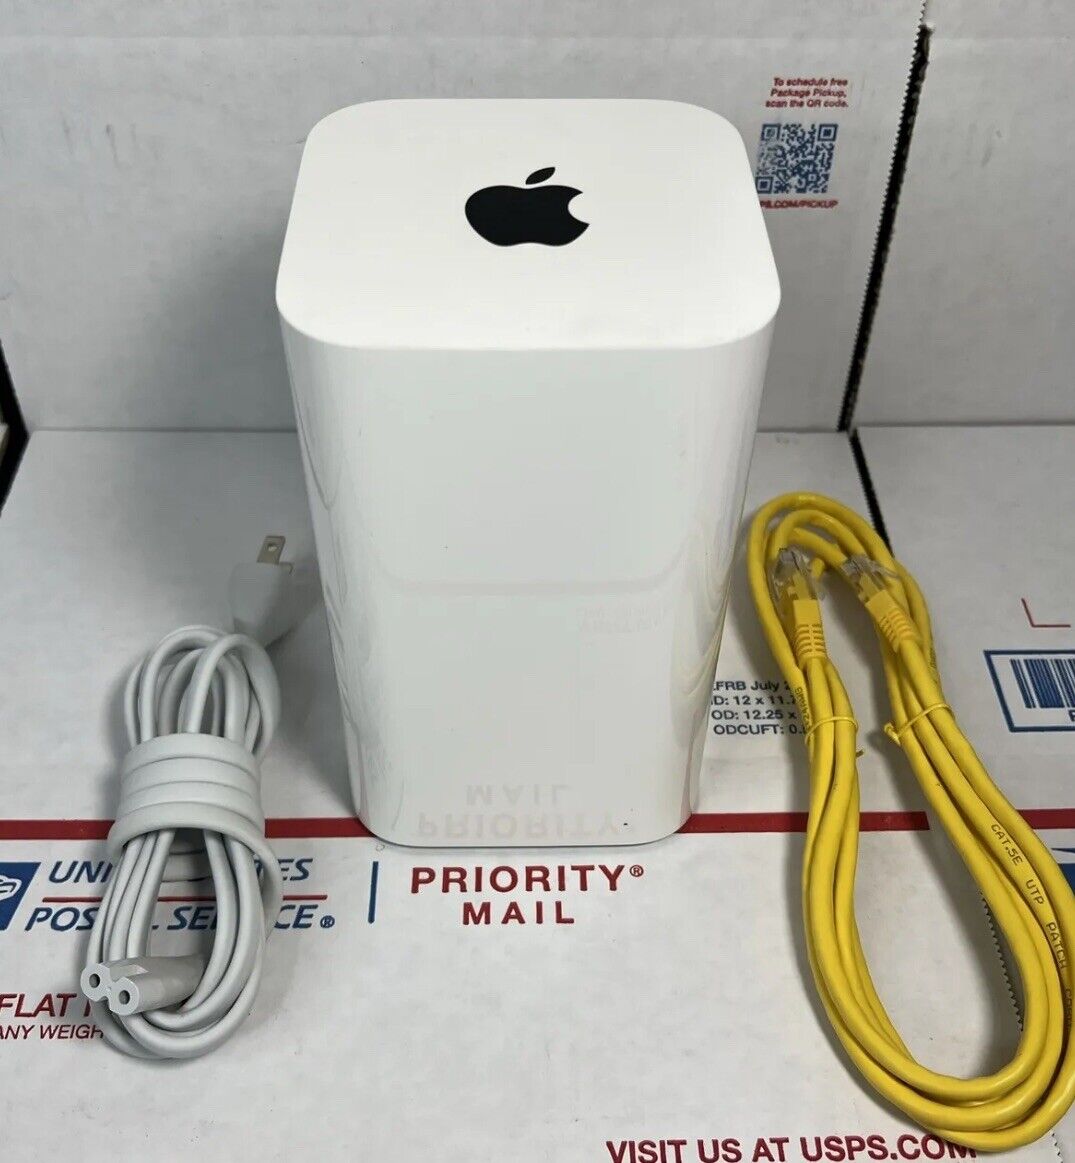 Apple AirPort Extreme Base Station  A-1521 Router (IN MINT CONDITION)